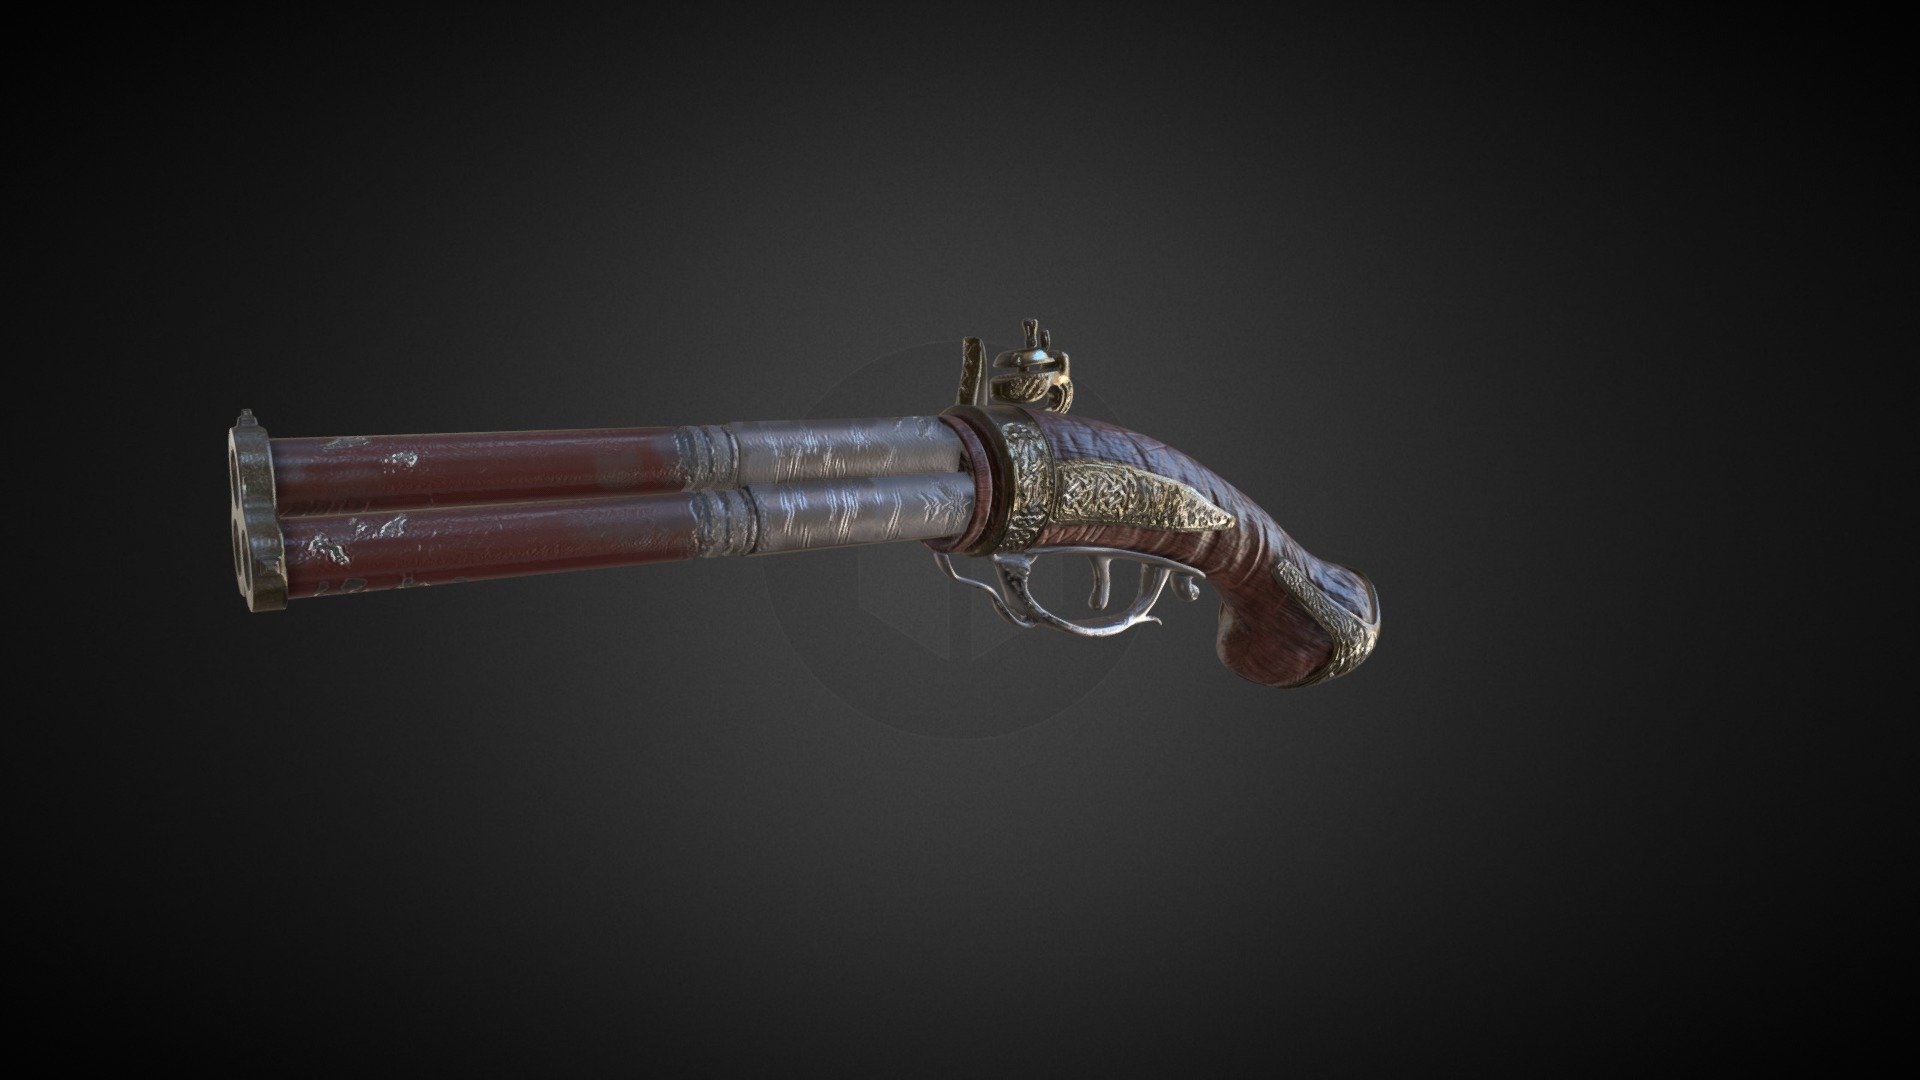 A 1700s style designed by Angela Lozano through several references from different antique guns. This type of guns work by black powder action when shooting a projectile as big as a marble. Reloading this gun used to take such a long time due to the conditions it had 3d model